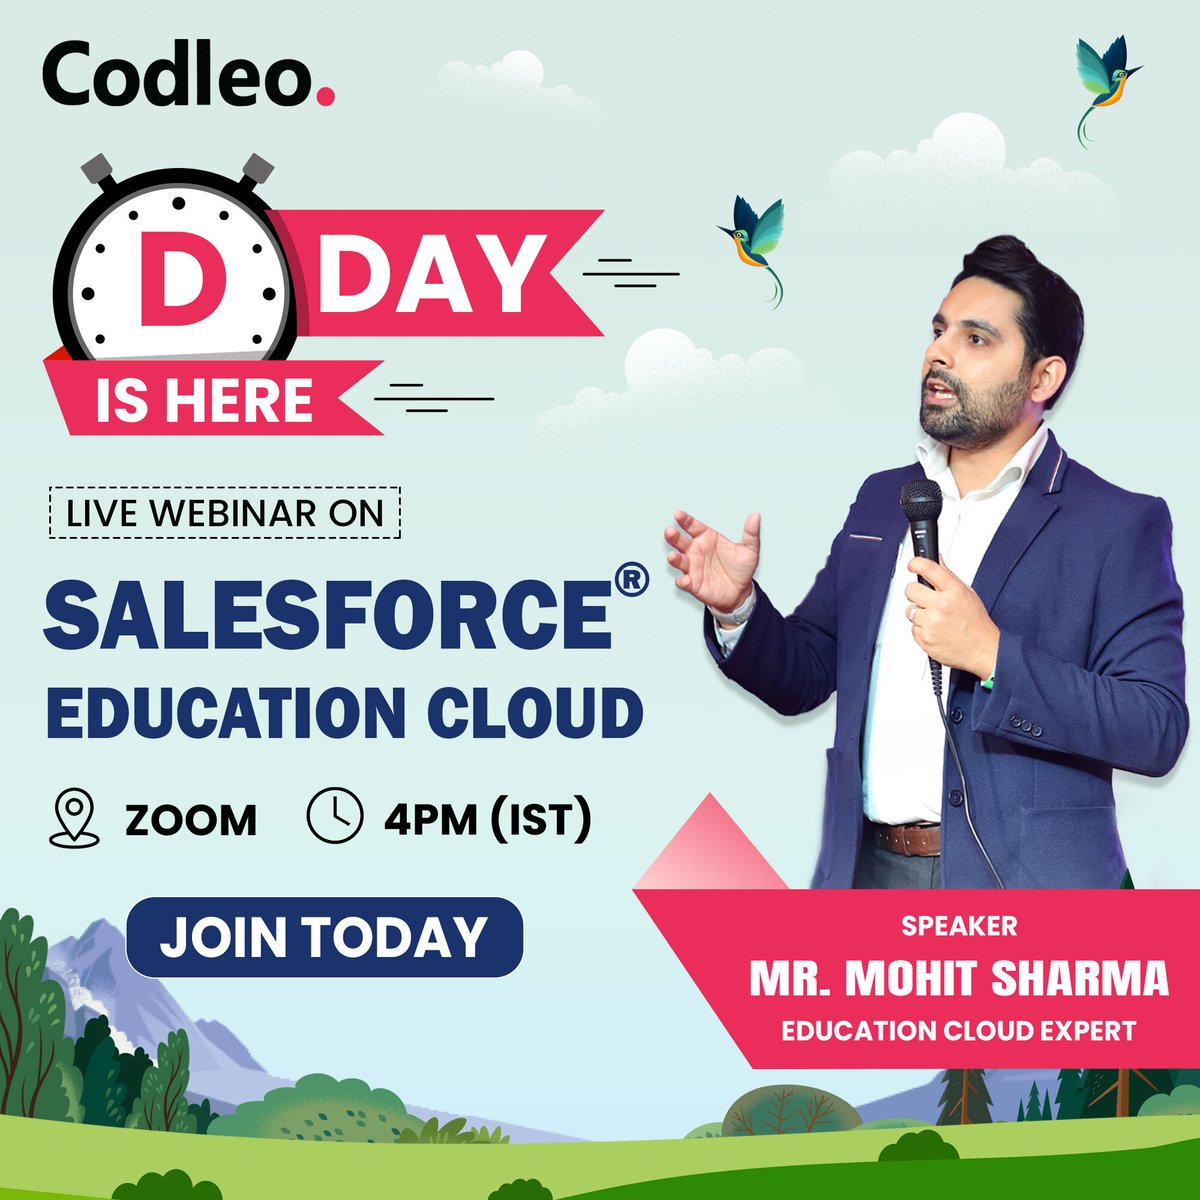 Just a few hours left until our Salesforce Education Cloud webinar! Don't miss out on this valuable opportunity. Join today!

#dday #salesforce #salesforceeducationcloud #educationcloud #jointoday #webinar #livewebinar #webinar2024 #onlinewebinar #Codleo